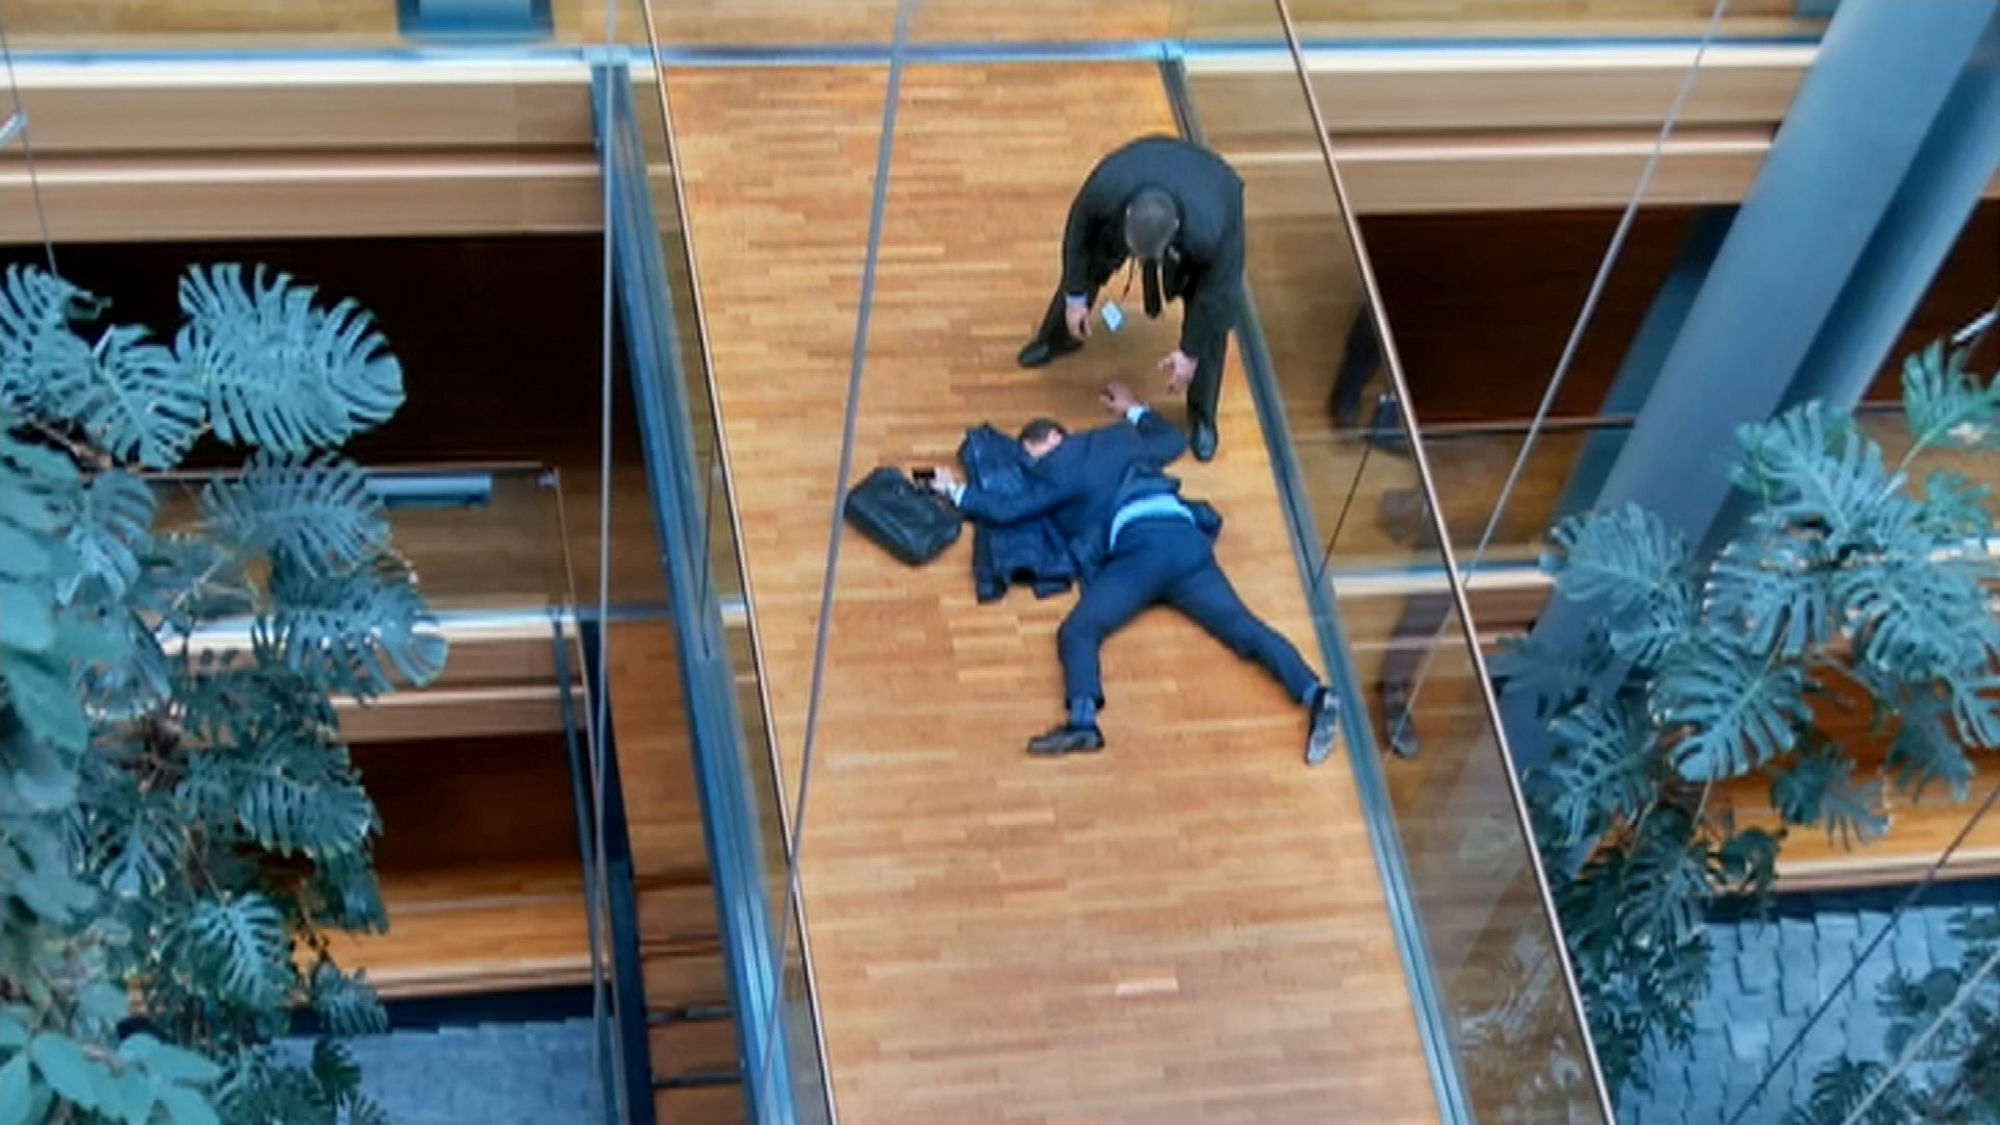 A still image taken from video shows a man, believed to be UK Independence Party (UKIP) Member of the European Parliament (MEP) Steven Woolfe, face down on a floor at the European Parliament in Strasbourg, France, October 6, 2016. REUTERS/ITV News via Reuters TV FOR EDITORIAL USE ONLY. NO RESALES. NO ARCHIVES. UNITED KINGDOM OUT. NO COMMERCIAL OR EDITORIAL SALES IN UNITED KINGDOM. THIS IMAGE HAS BEEN SUPPLIED BY A THIRD PARTY. IT IS DISTRIBUTED, EXACTLY AS RECEIVED BY REUTERS, AS A SERVICE TO CLIENTS. 48-HOUR USE ONLY. TPX IMAGES OF THE DAY